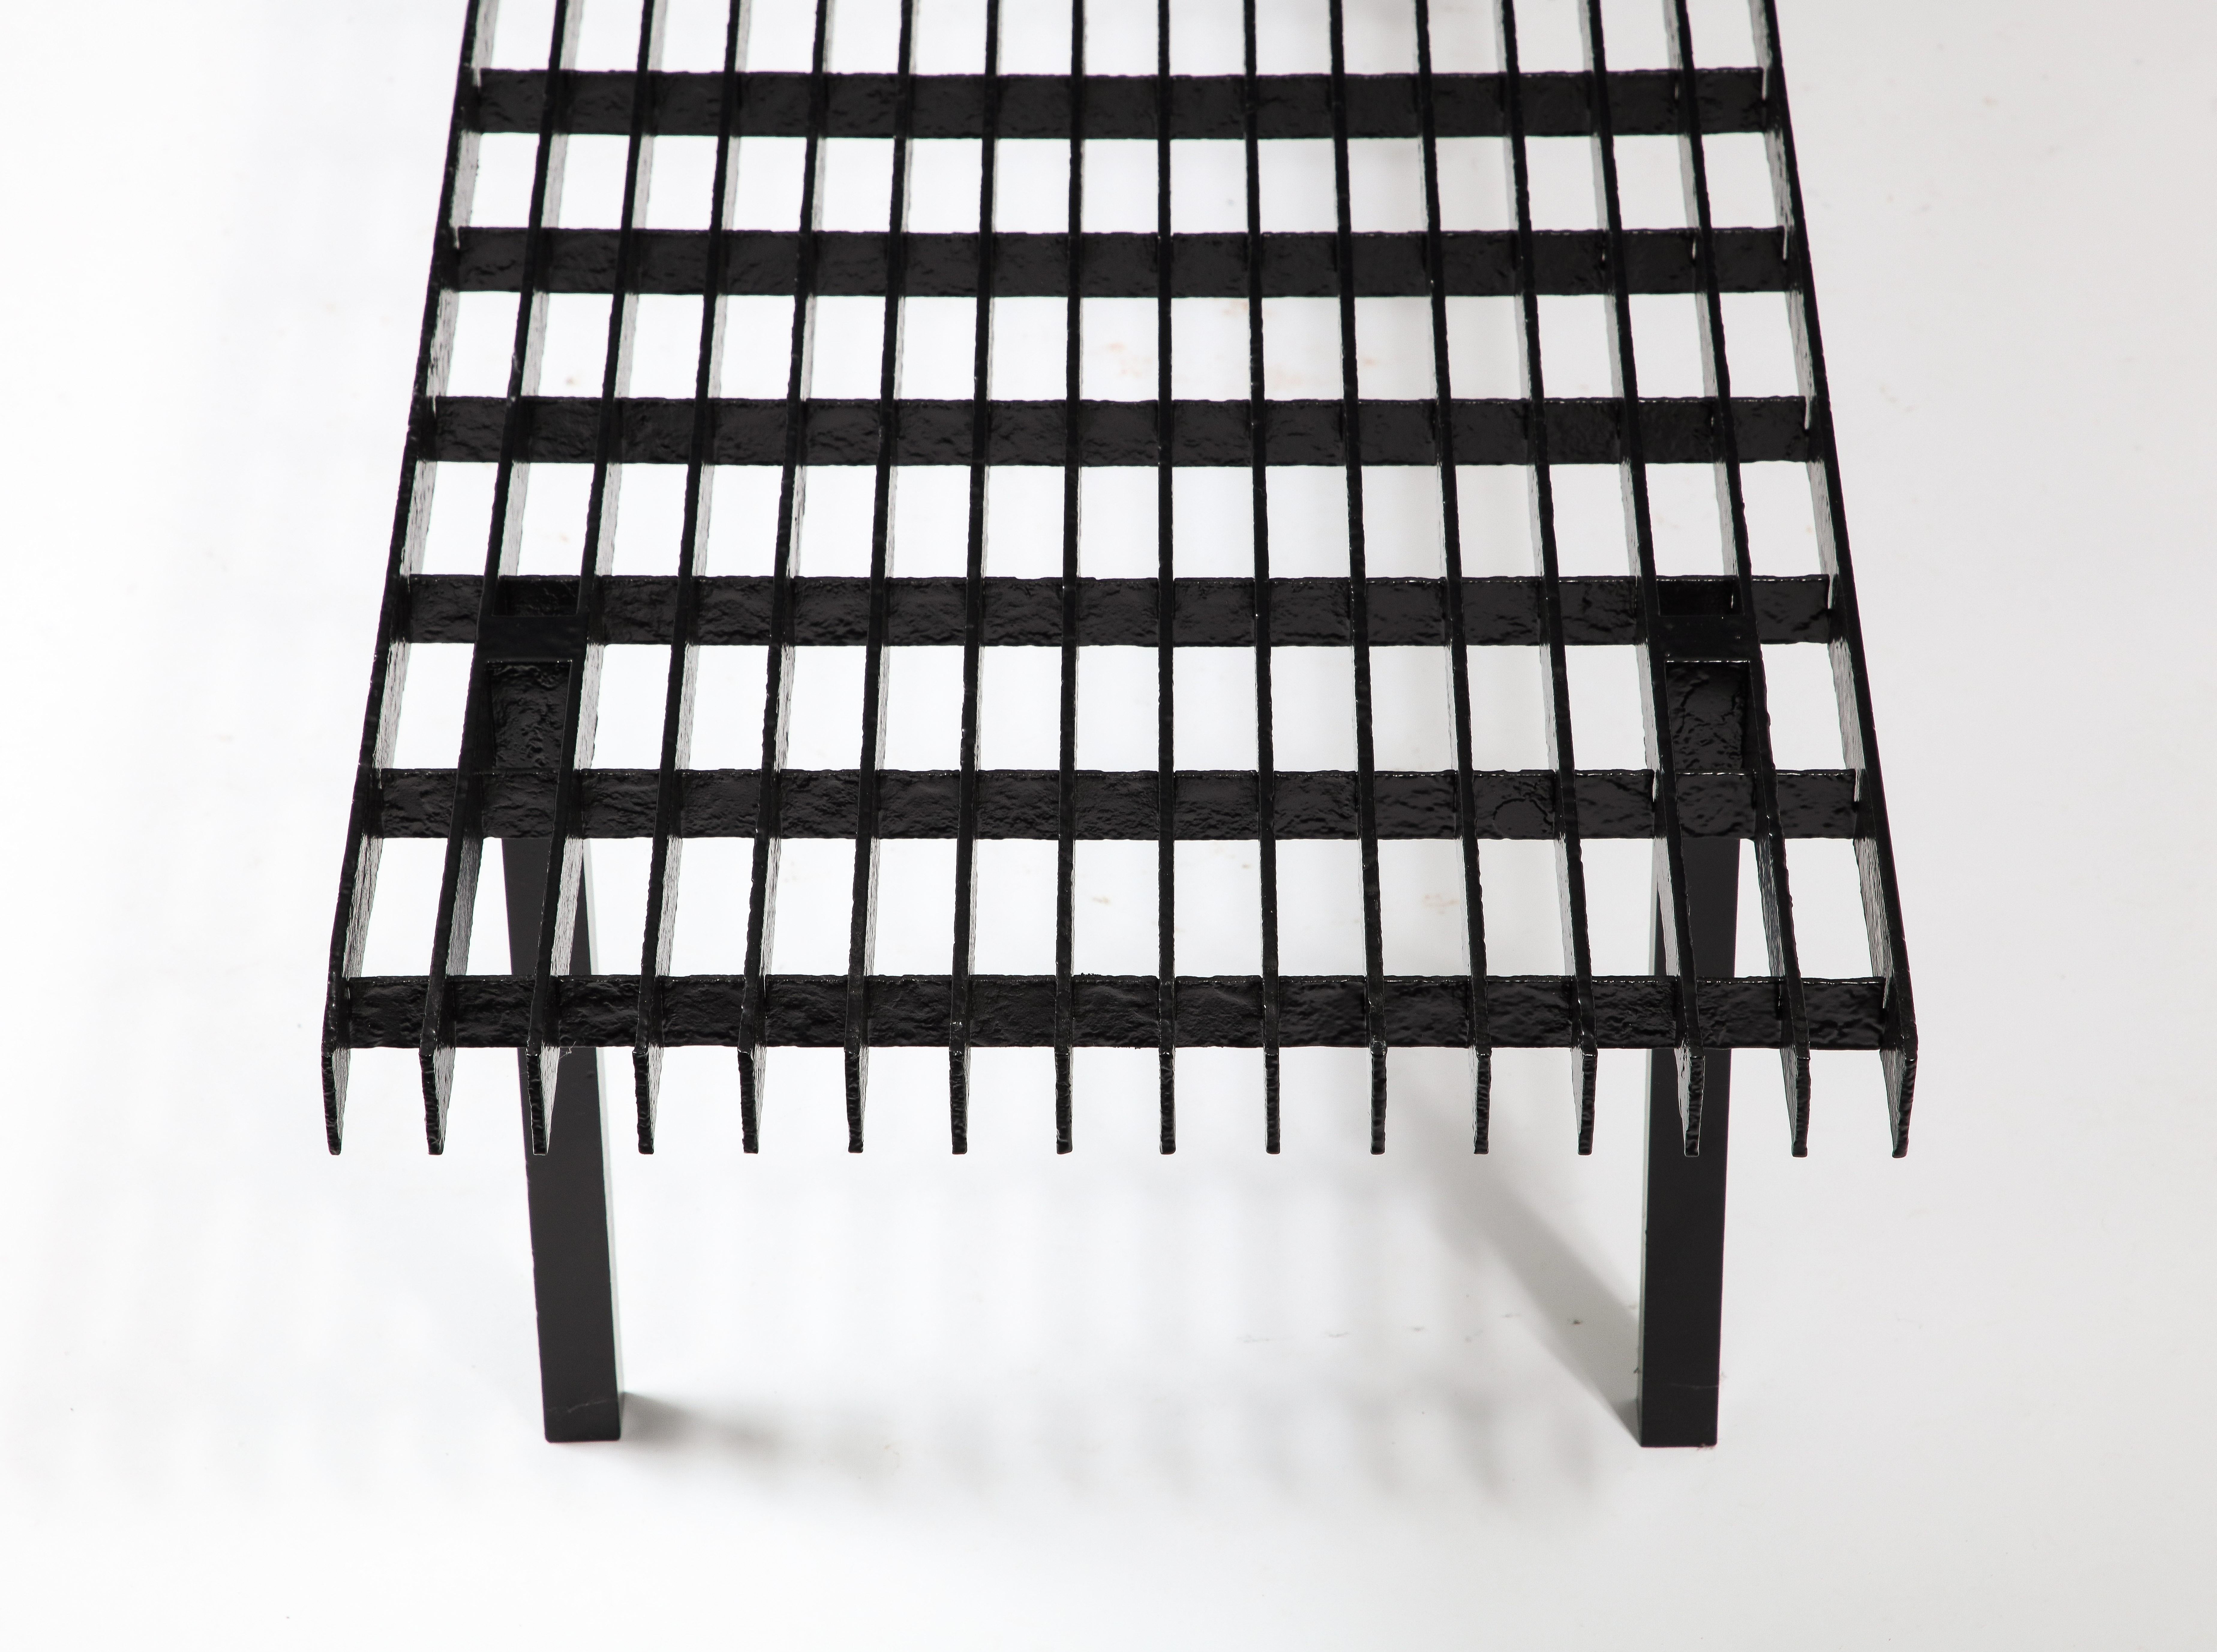 Black Enameled Steel Slat Bench or Low Coffee Table, USA 1970's For Sale 1